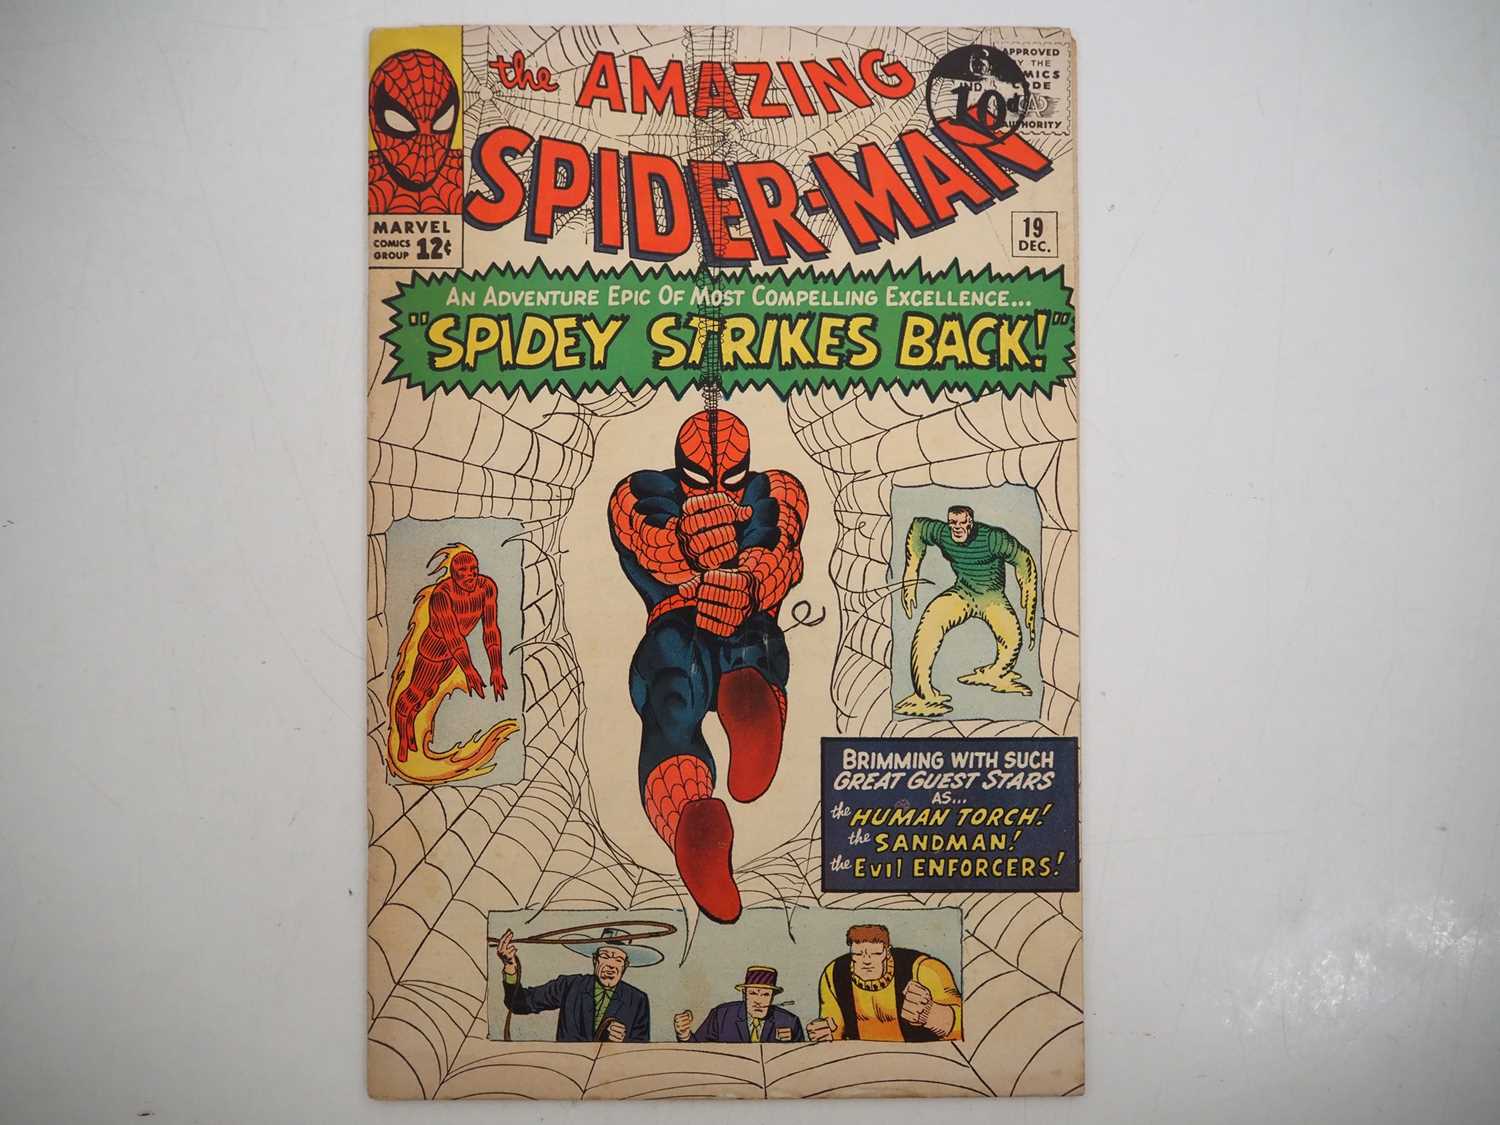 AMAZING SPIDER-MAN #19 - (1964 - MARVEL) - Sandman and the Enforcers appearances + First